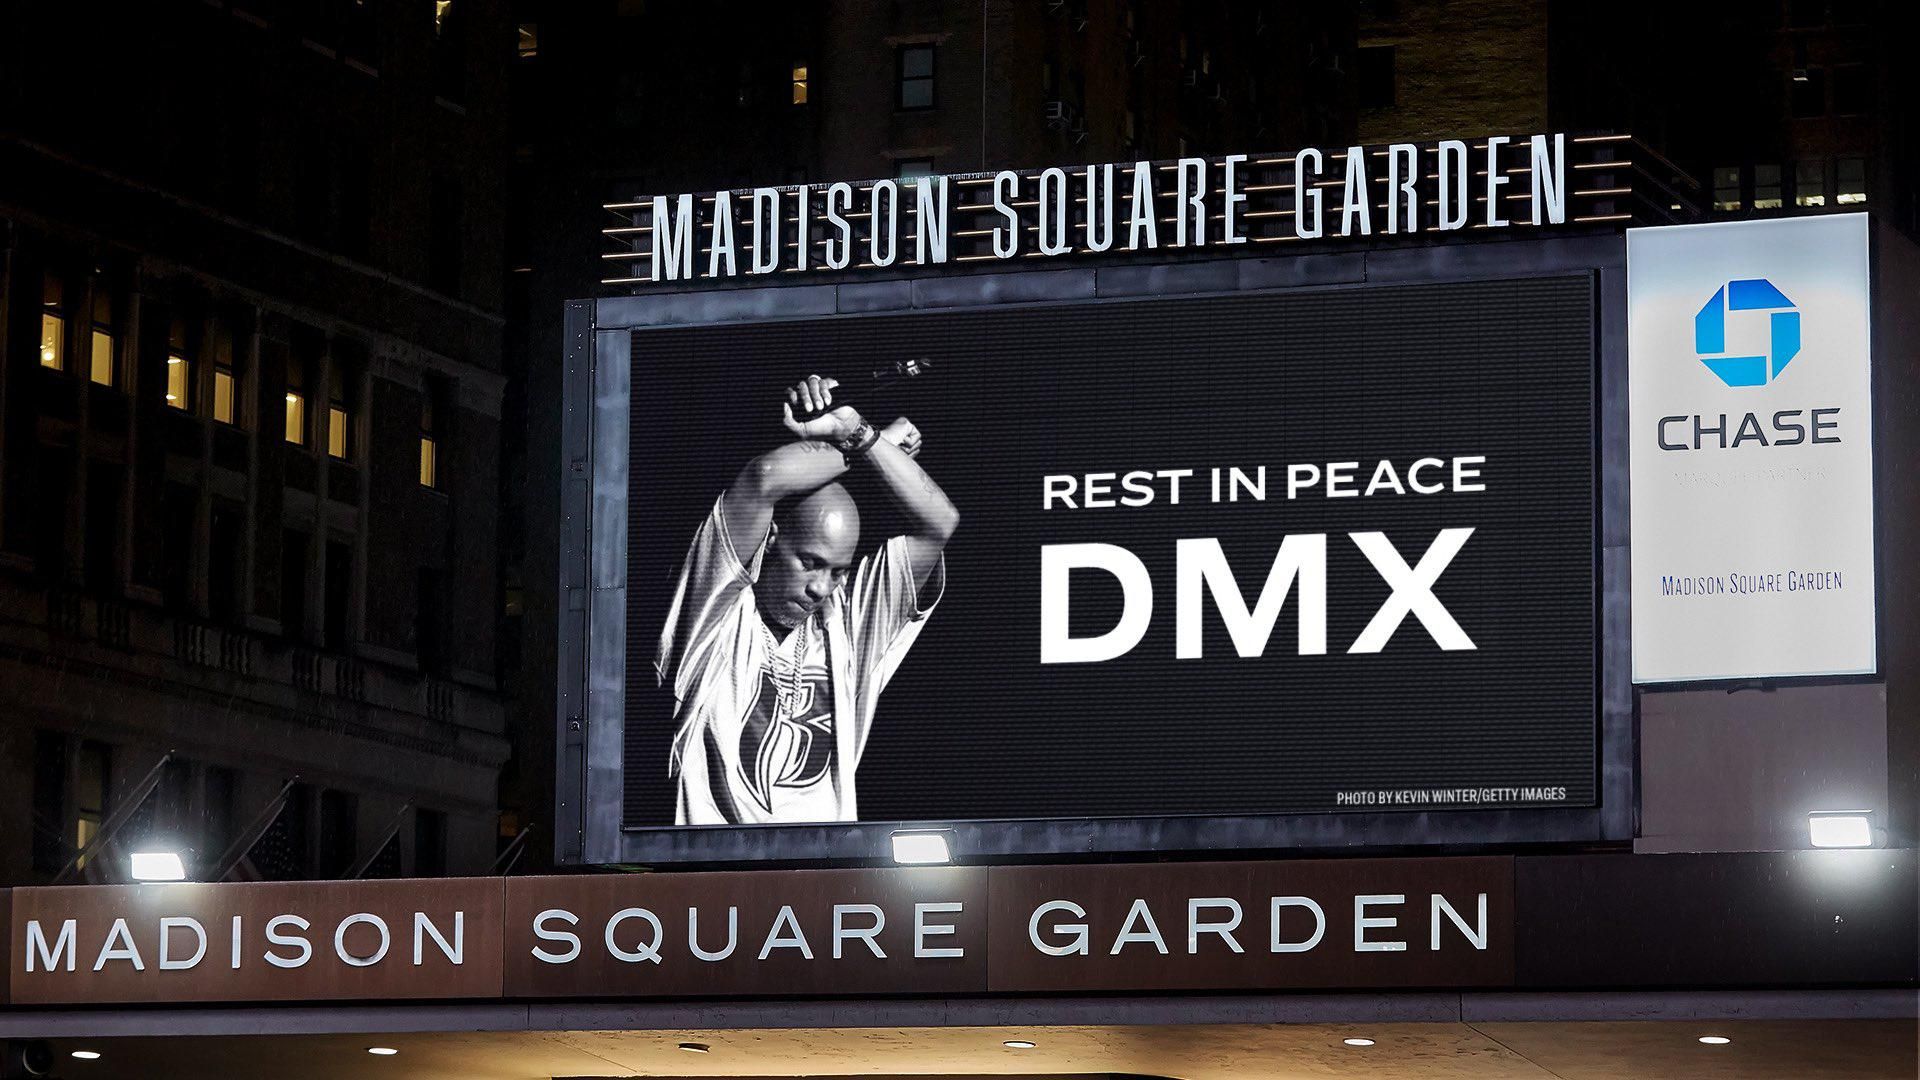 DMX on the Madison Square Garden marquee